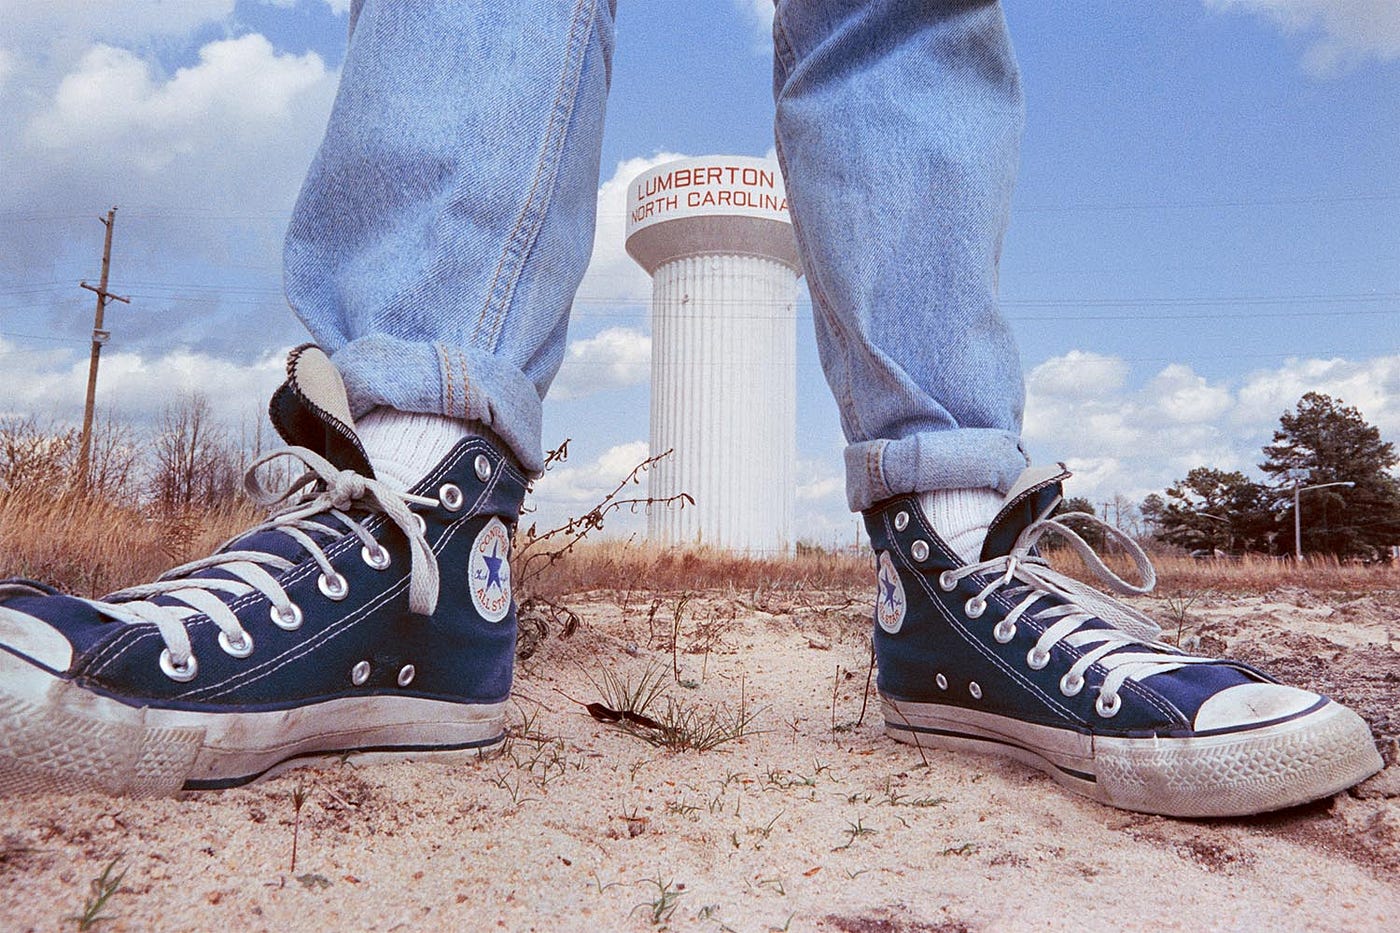 Converse All Stars. A 1992 photo essay using film to… | by Peter Belanger |  Medium